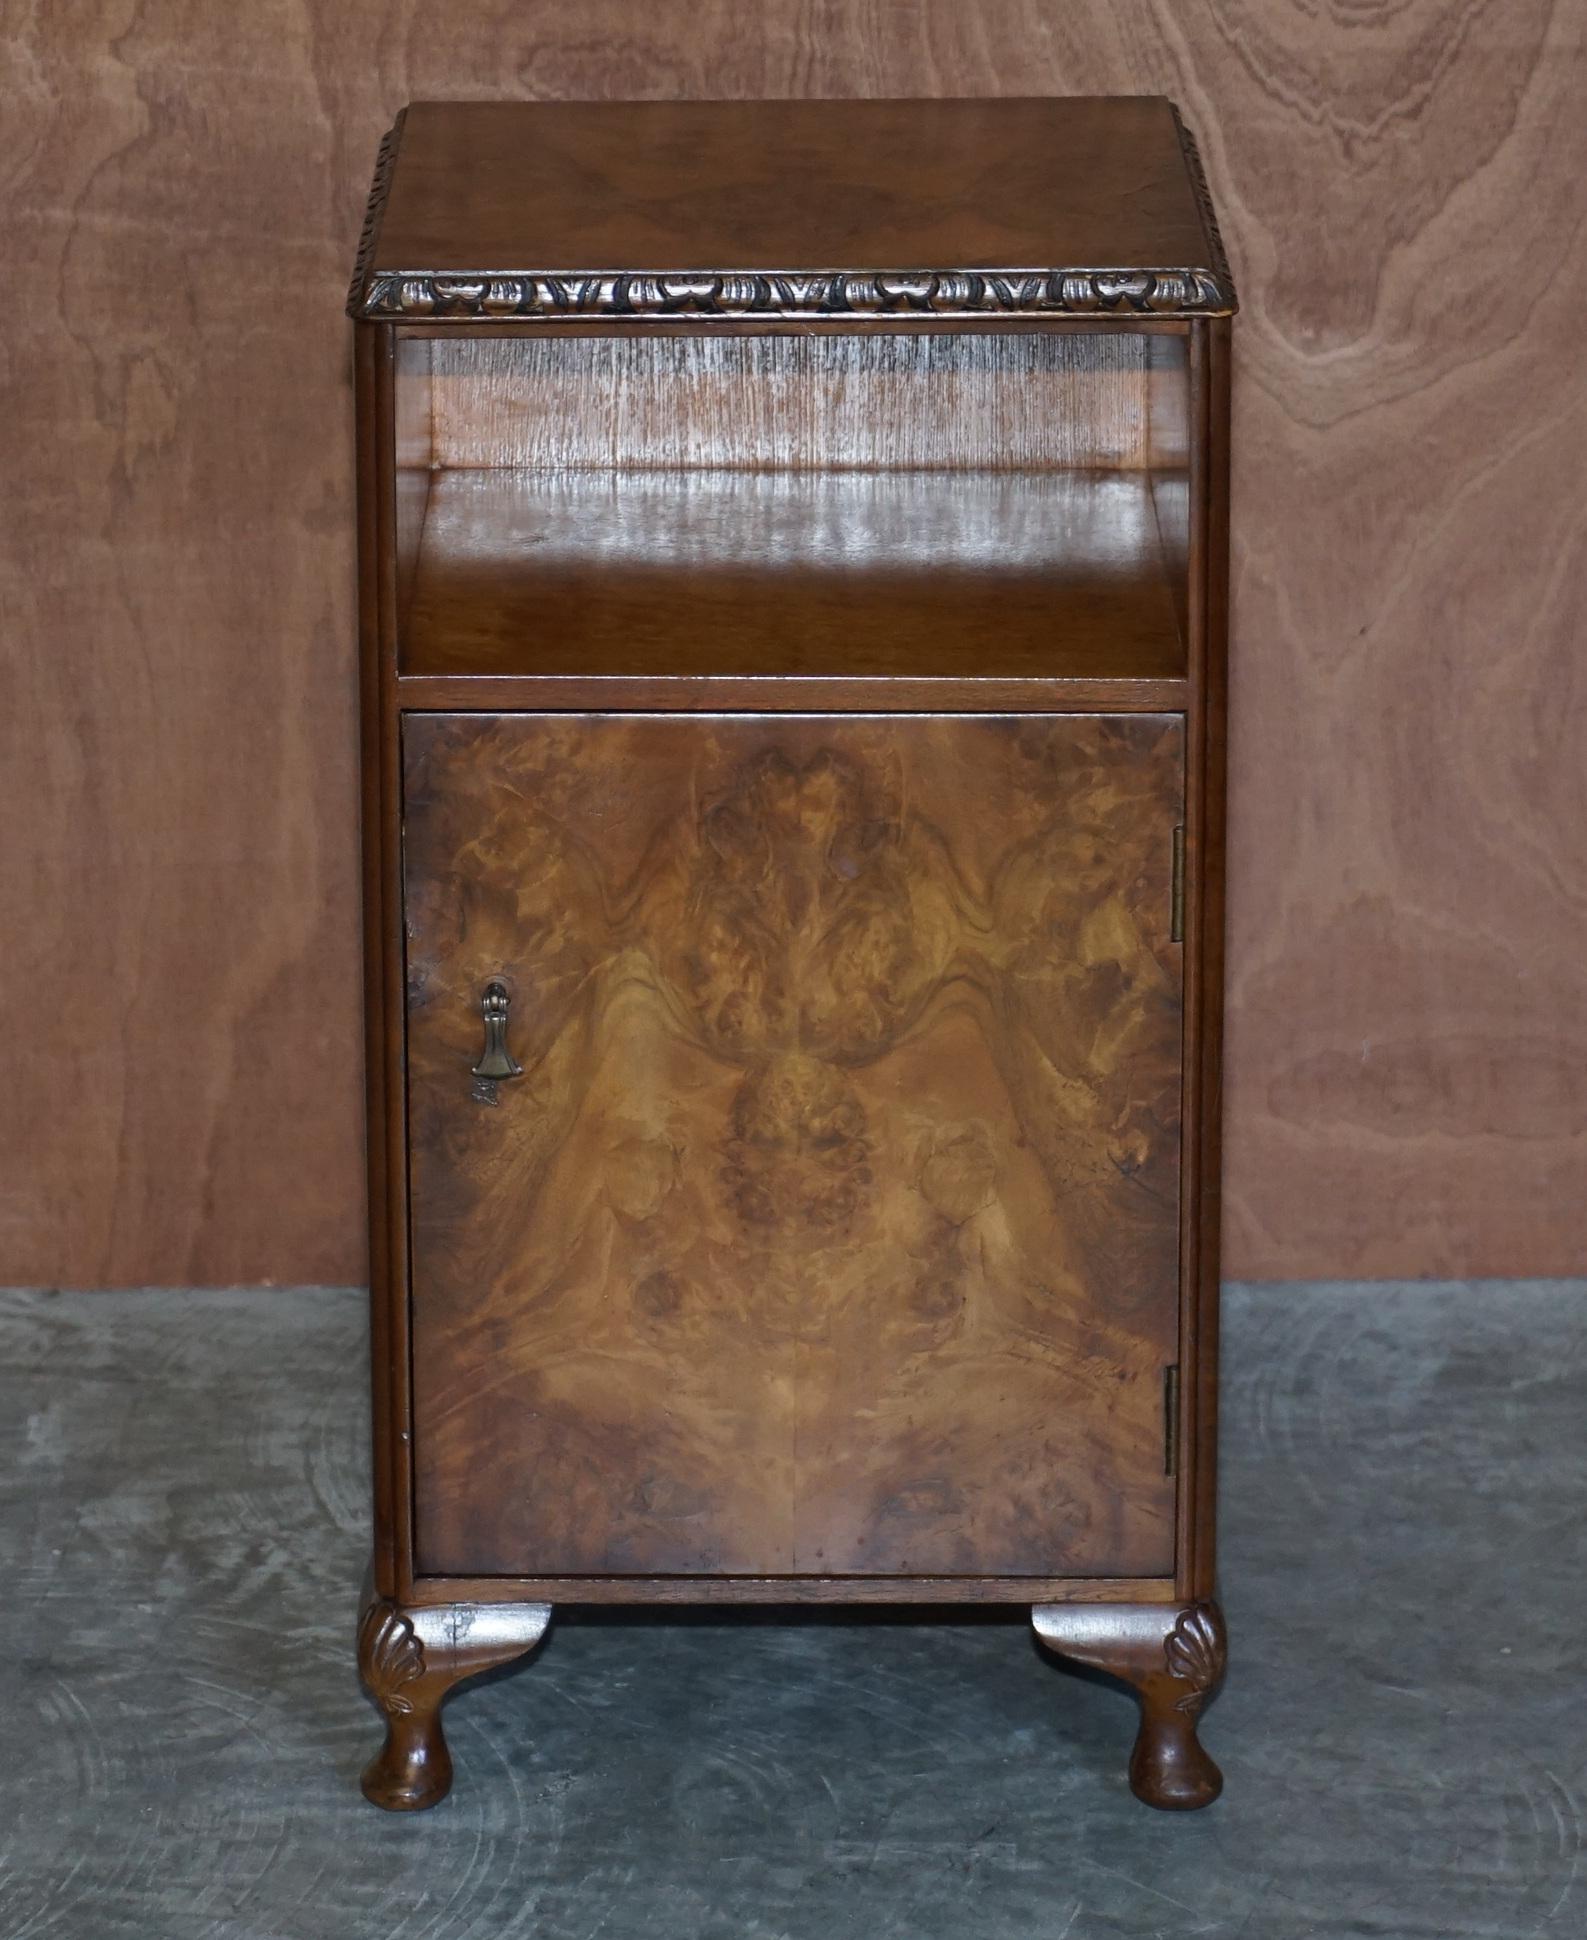 Royal House Antiques

Royal House Antiques is delighted to offer for sale this stunning burr walnut Waring & Gillow bedside lamp wine table or cupboard

Please note the delivery fee listed is just a guide, it covers within the M25 only for the